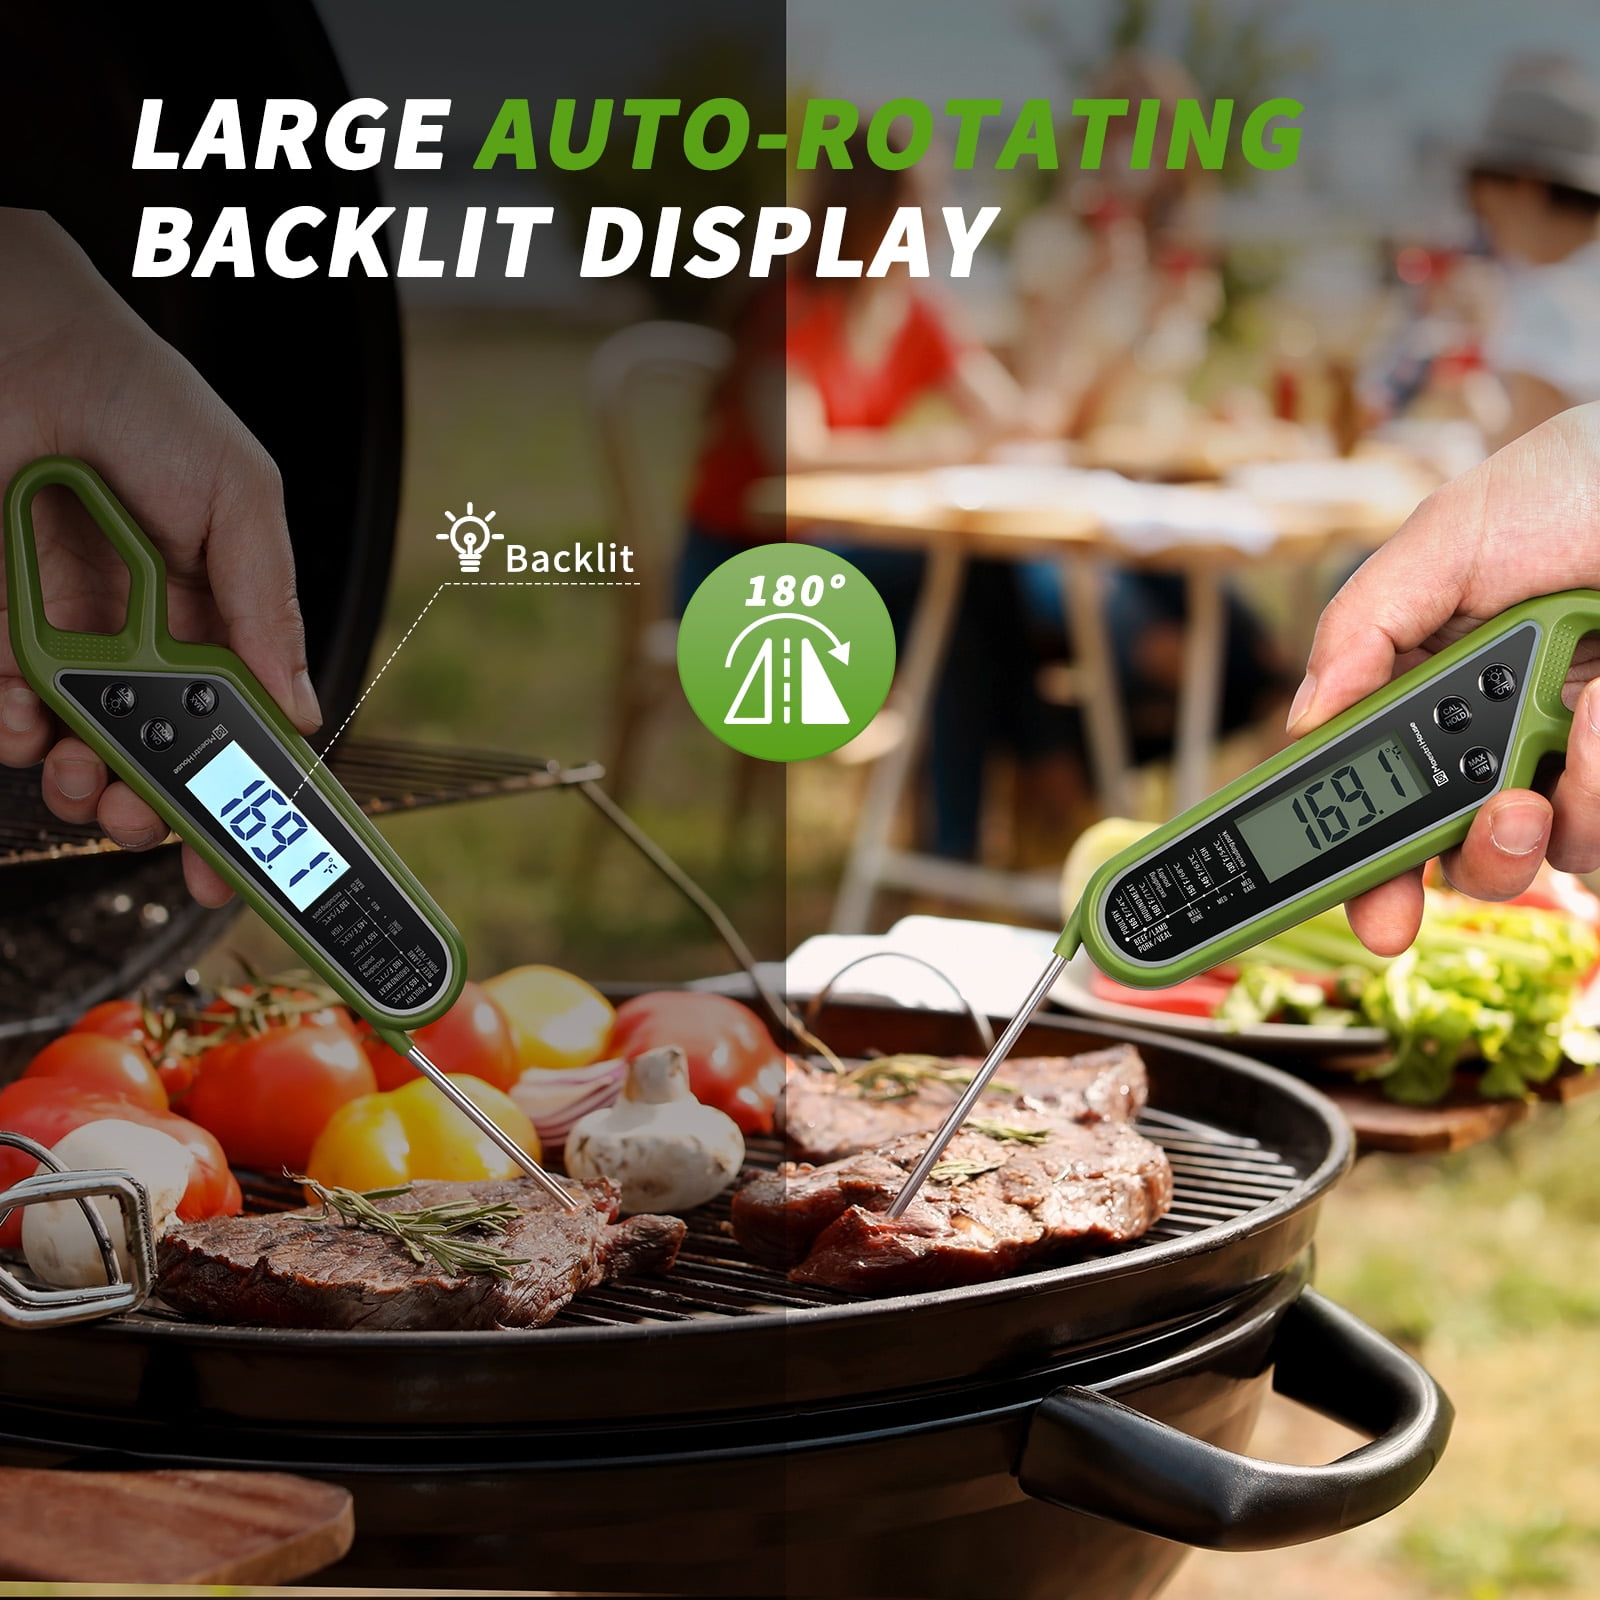 This 'amazing' 2-in-1 food thermometer is perfect for BBQ season